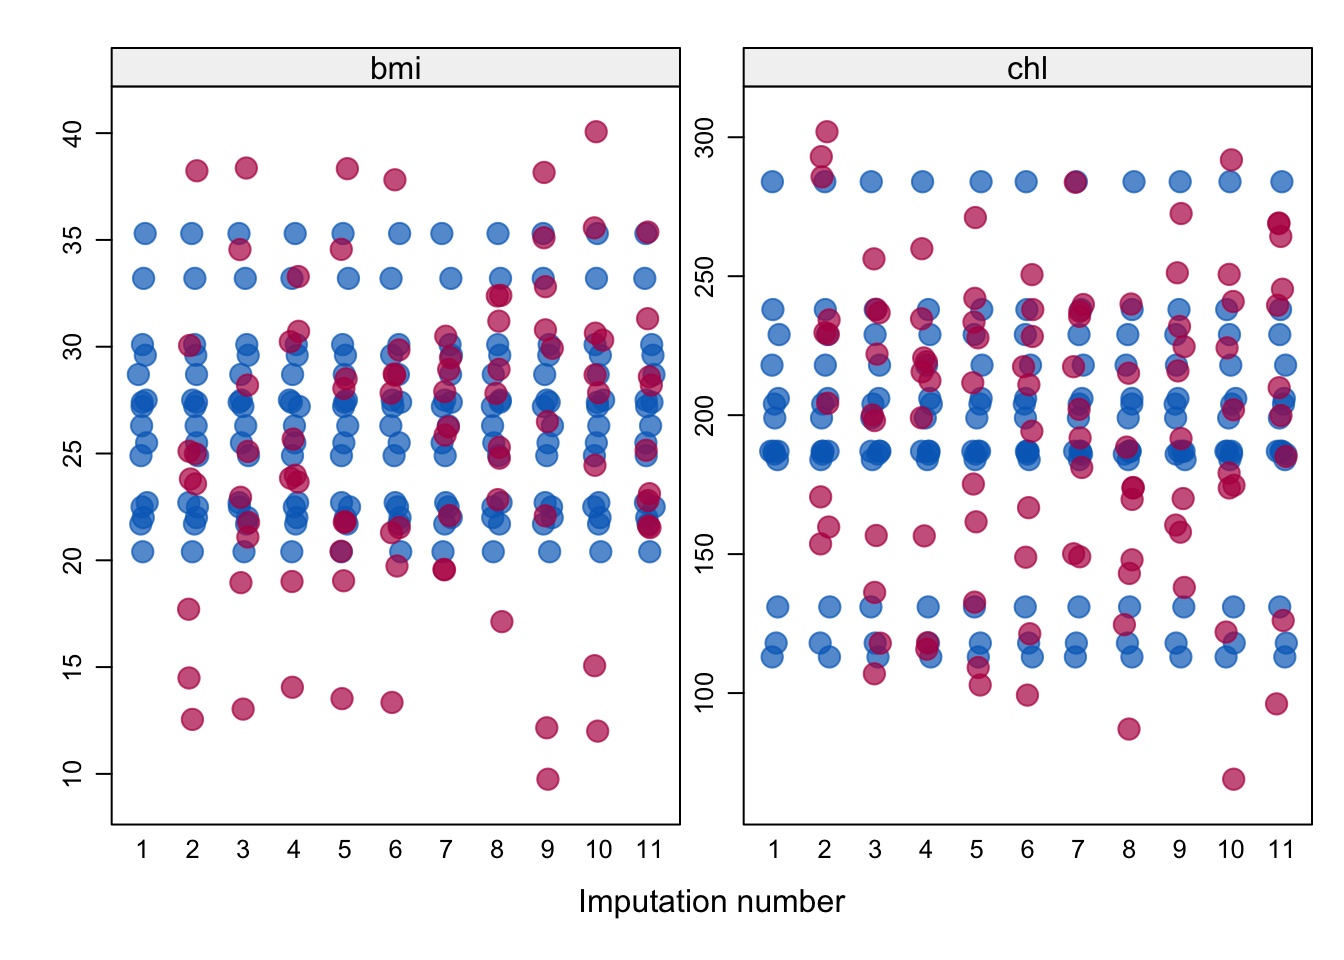 Strip plots of the imputed variables bmi and chl. The observed data is shown in blue, and imputed data in red. Imputation 1 is shown as the original, incomplete data, and the 10 imputations are shown proceeding this.